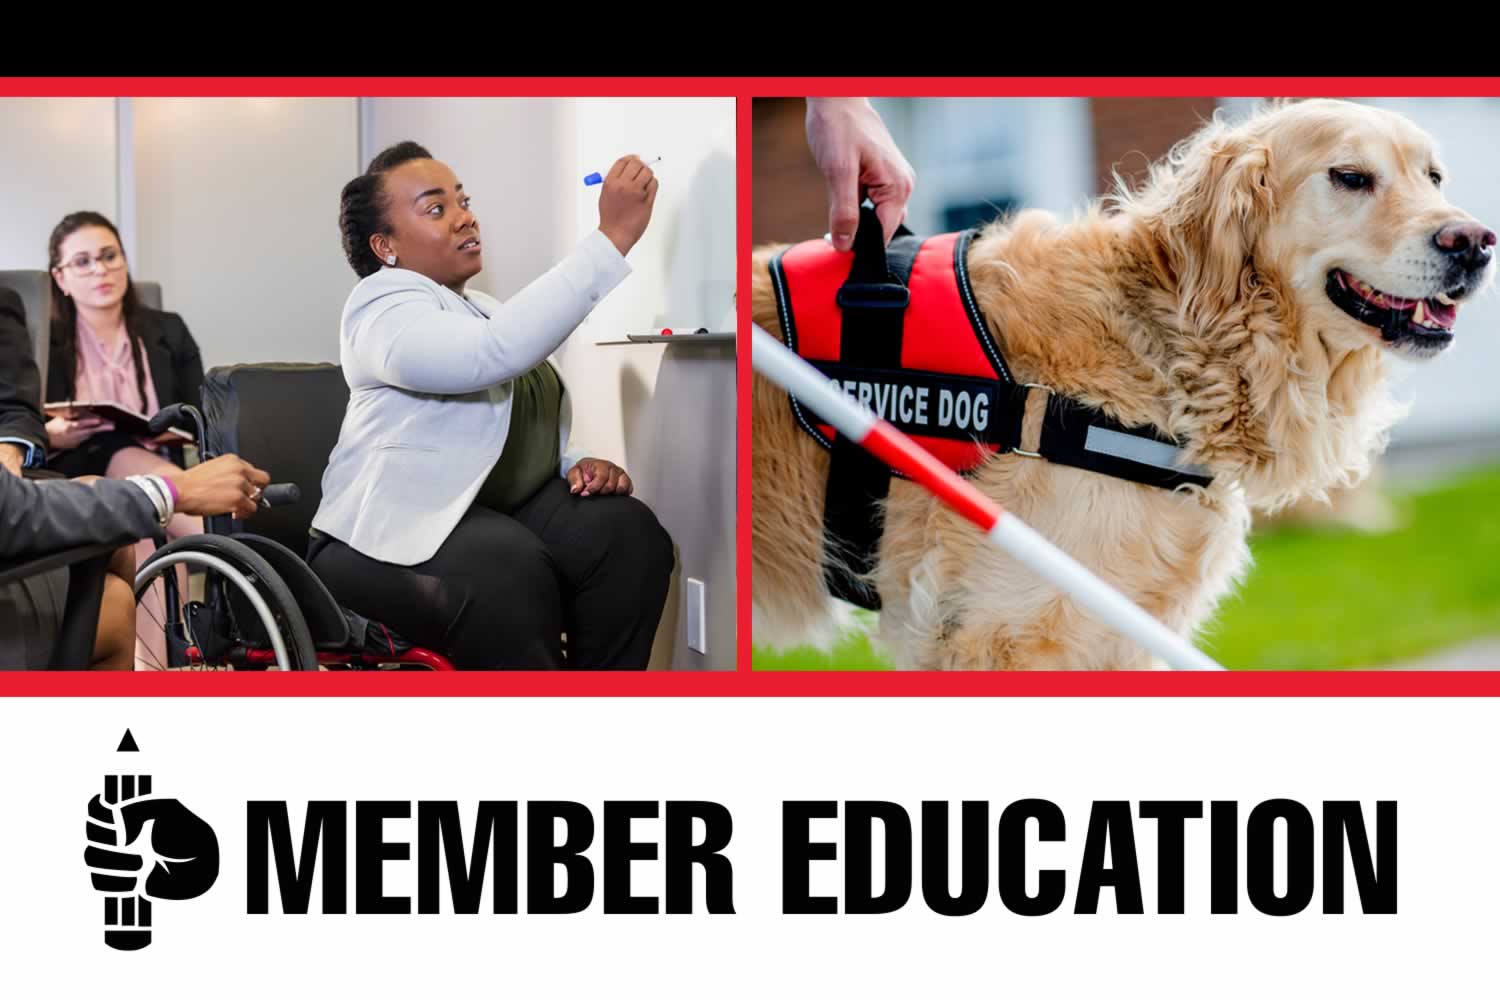 Member Education. Image of woman in wheelchair and service dog